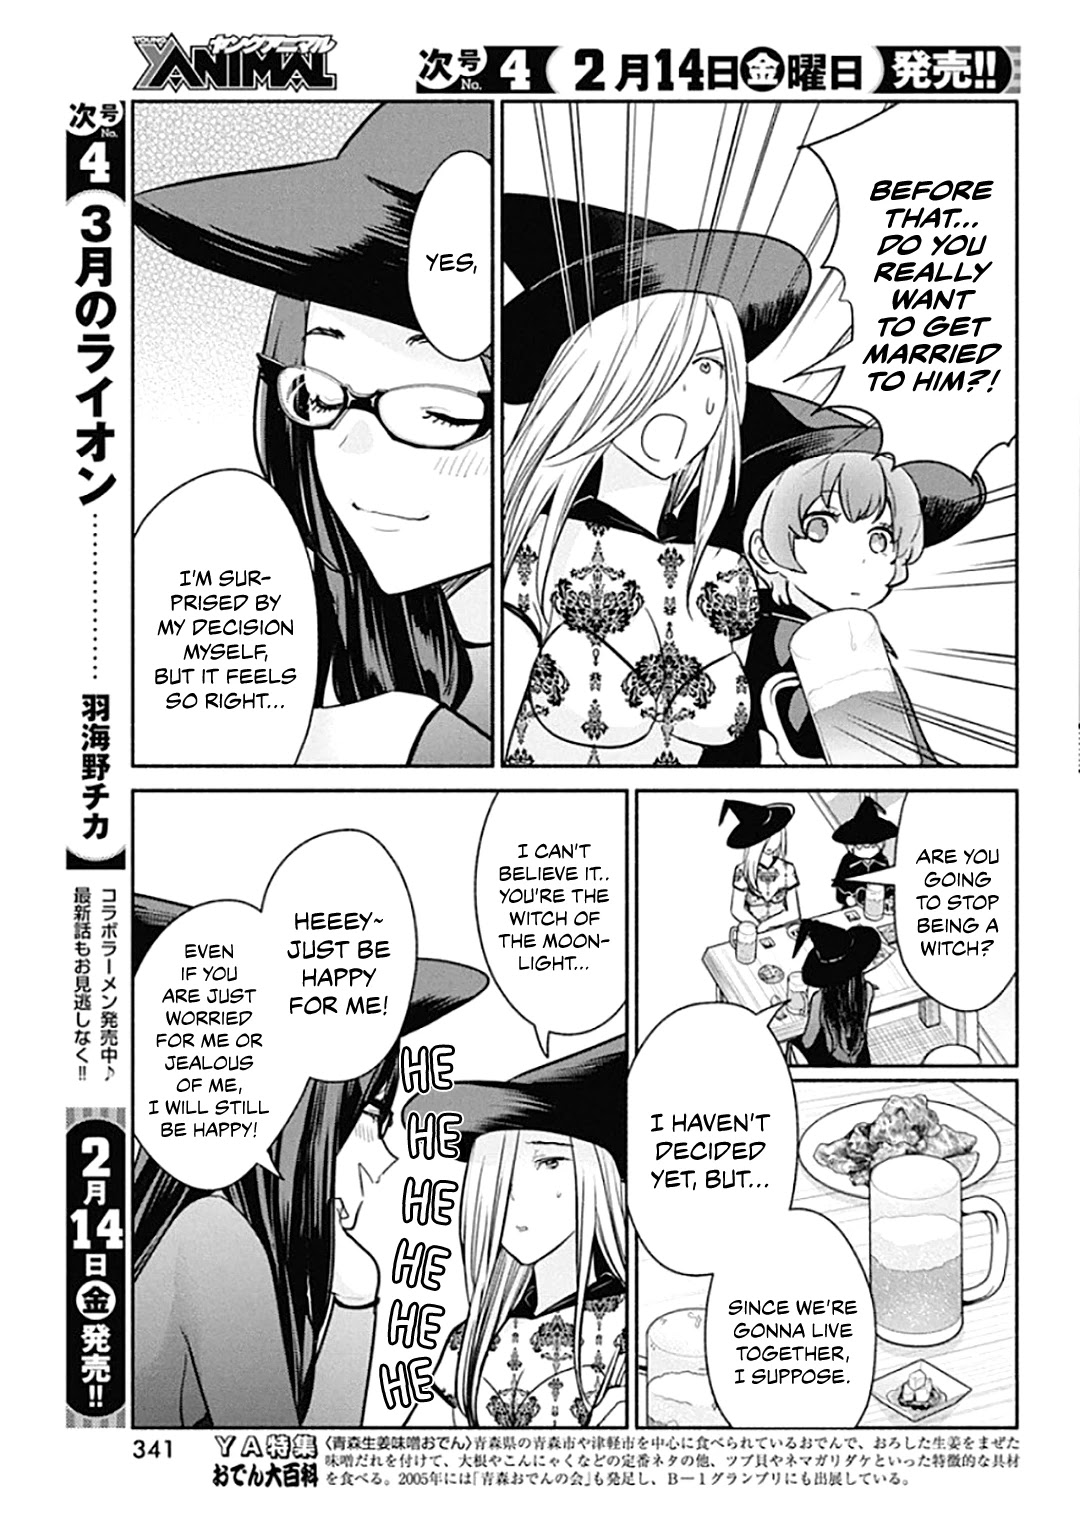 The Life of the Witch Who Remains Single for About 300 Years! - Chapter 43 Page 6